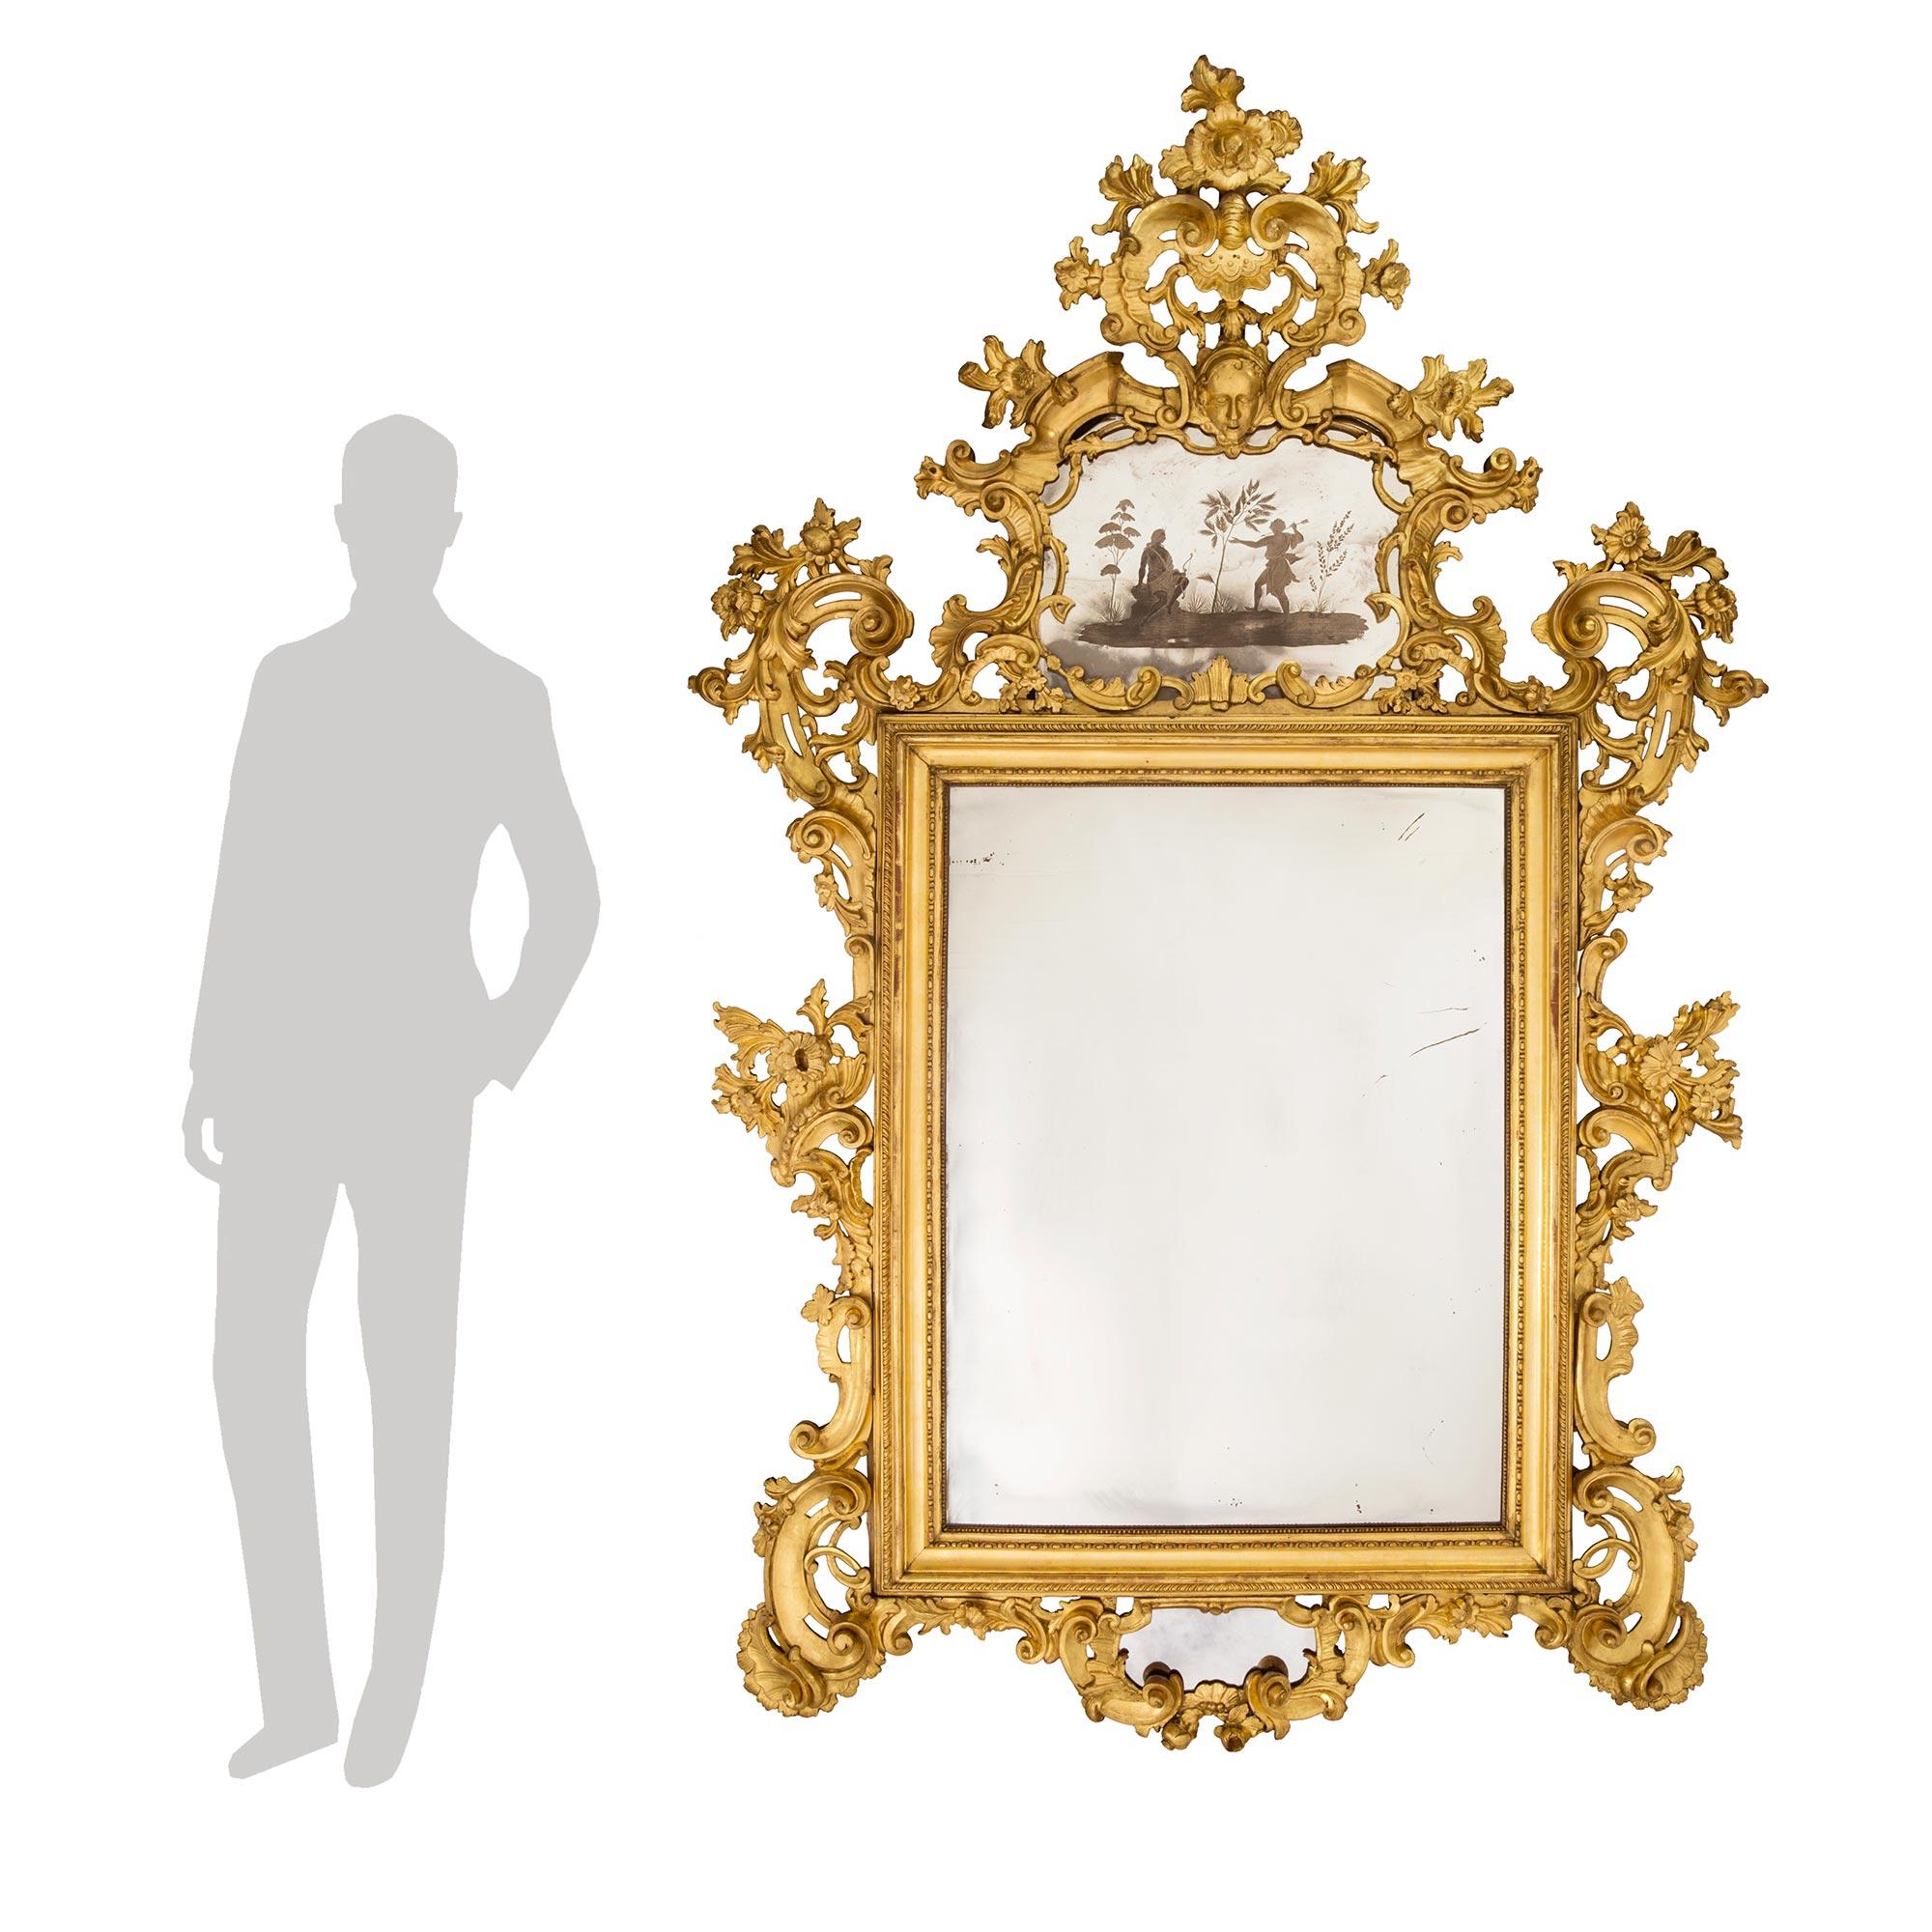 A magnificent Italian 18th century giltwood Venetian mirror. This finely carved mirror has original mirror plates and is sumptuously adorned with scrolled foliate and garlands. At the bottom is a mirror amidst scrolled giltwood. Continuing up each